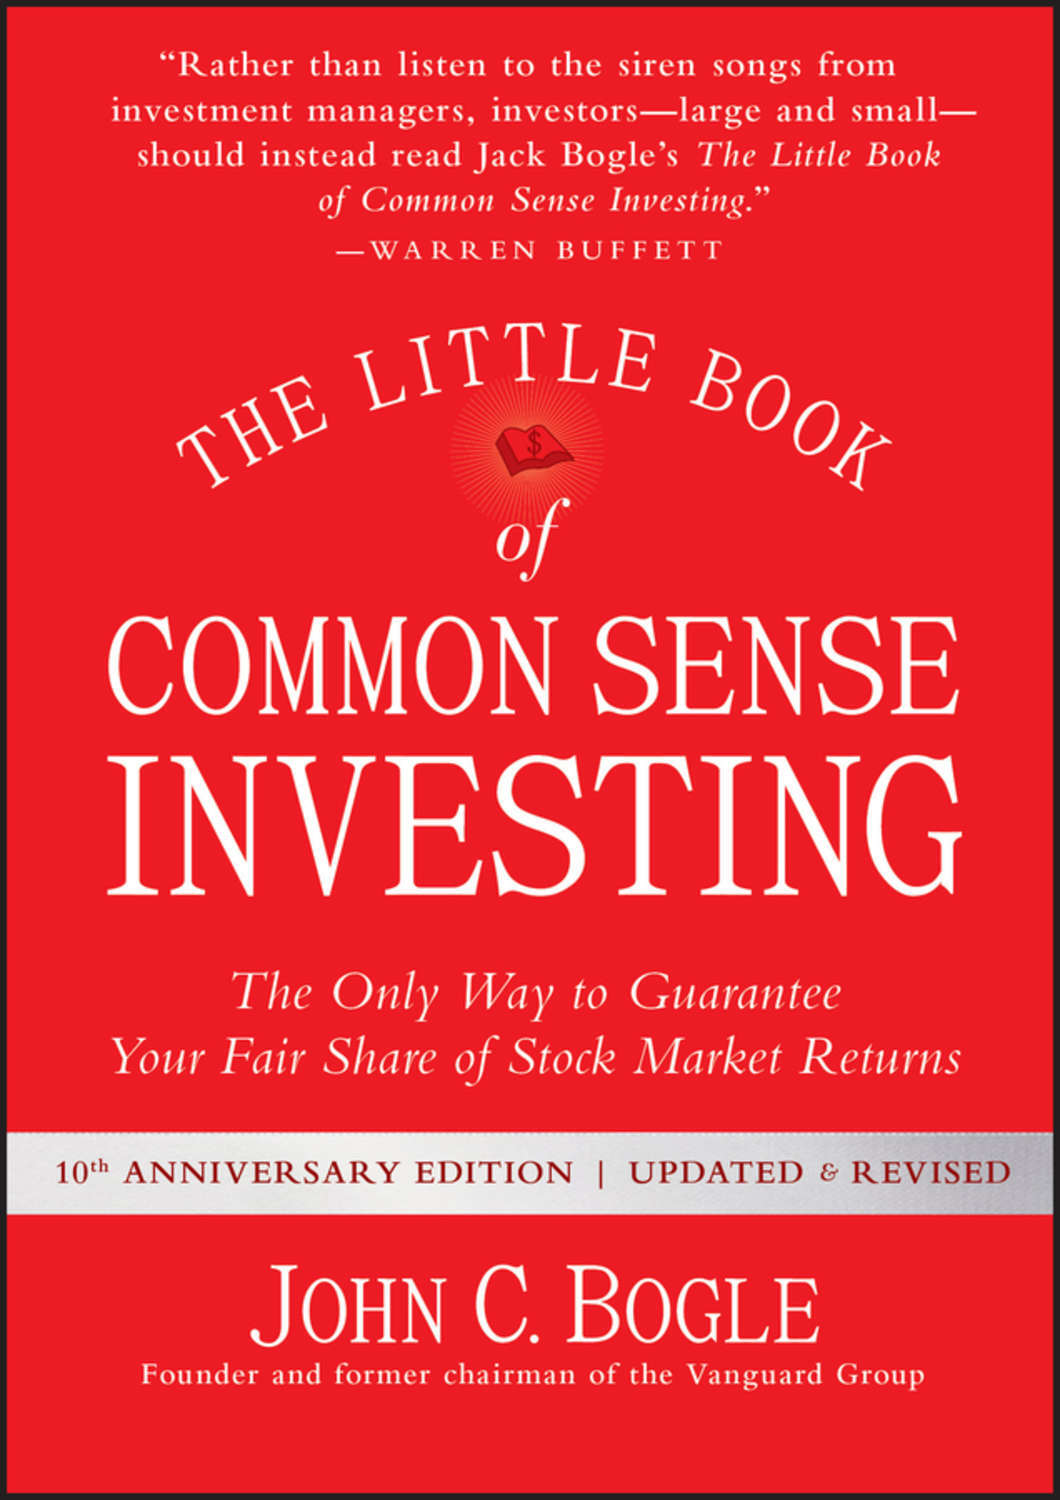 The little book of common sense investing by john bogle download forex strategy victory